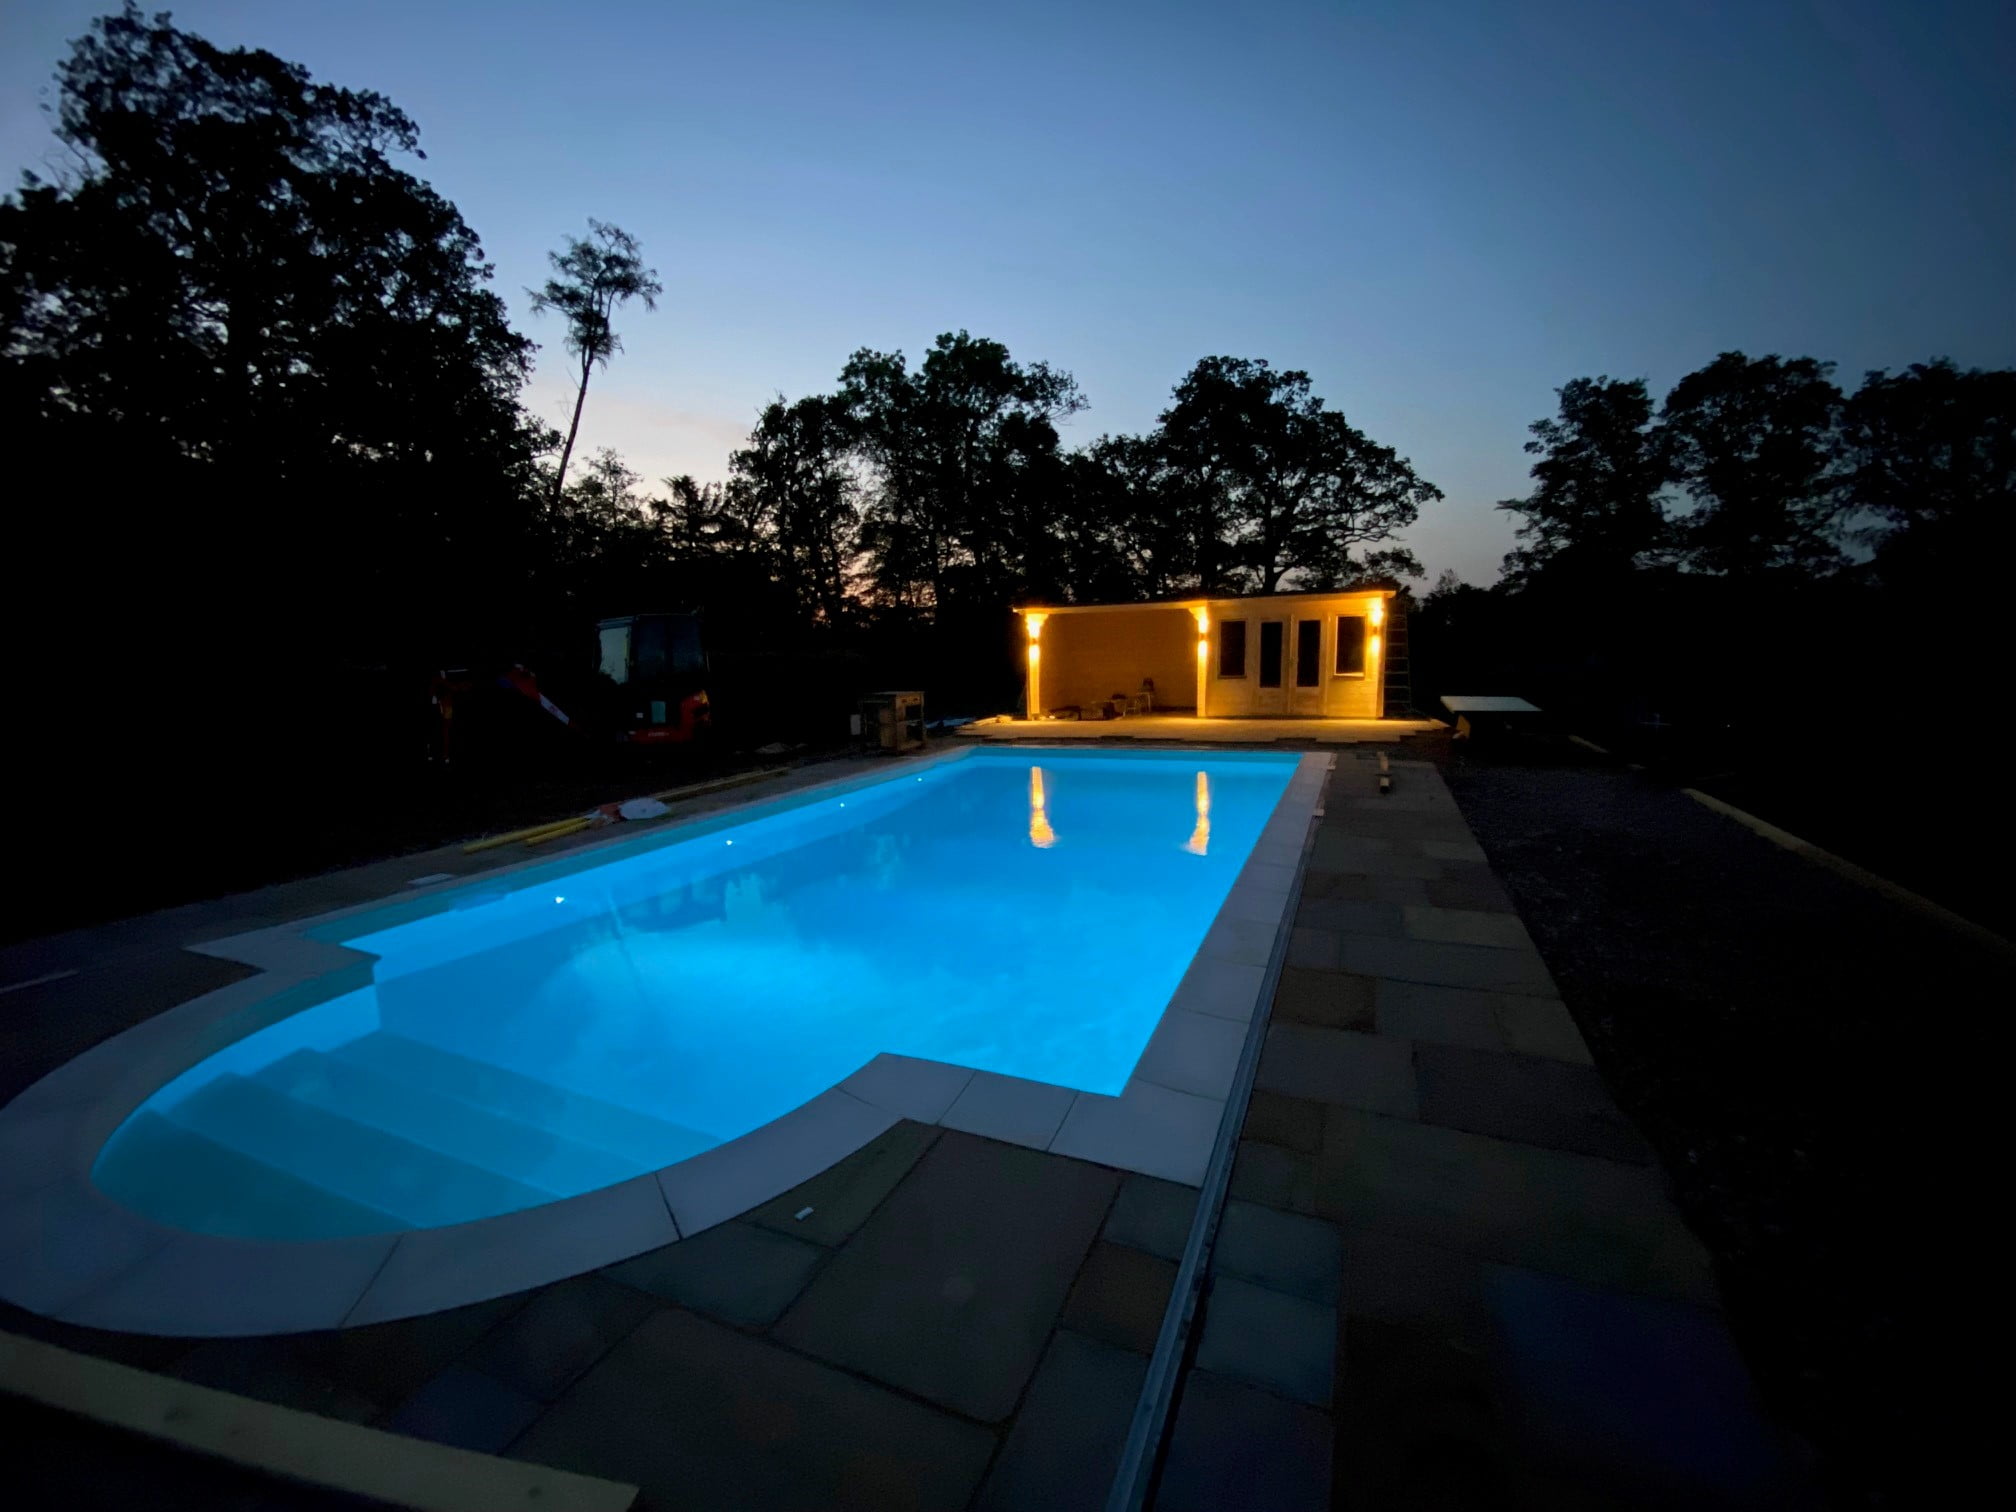 Finished swimming pool at night with lights on and an outbuilding